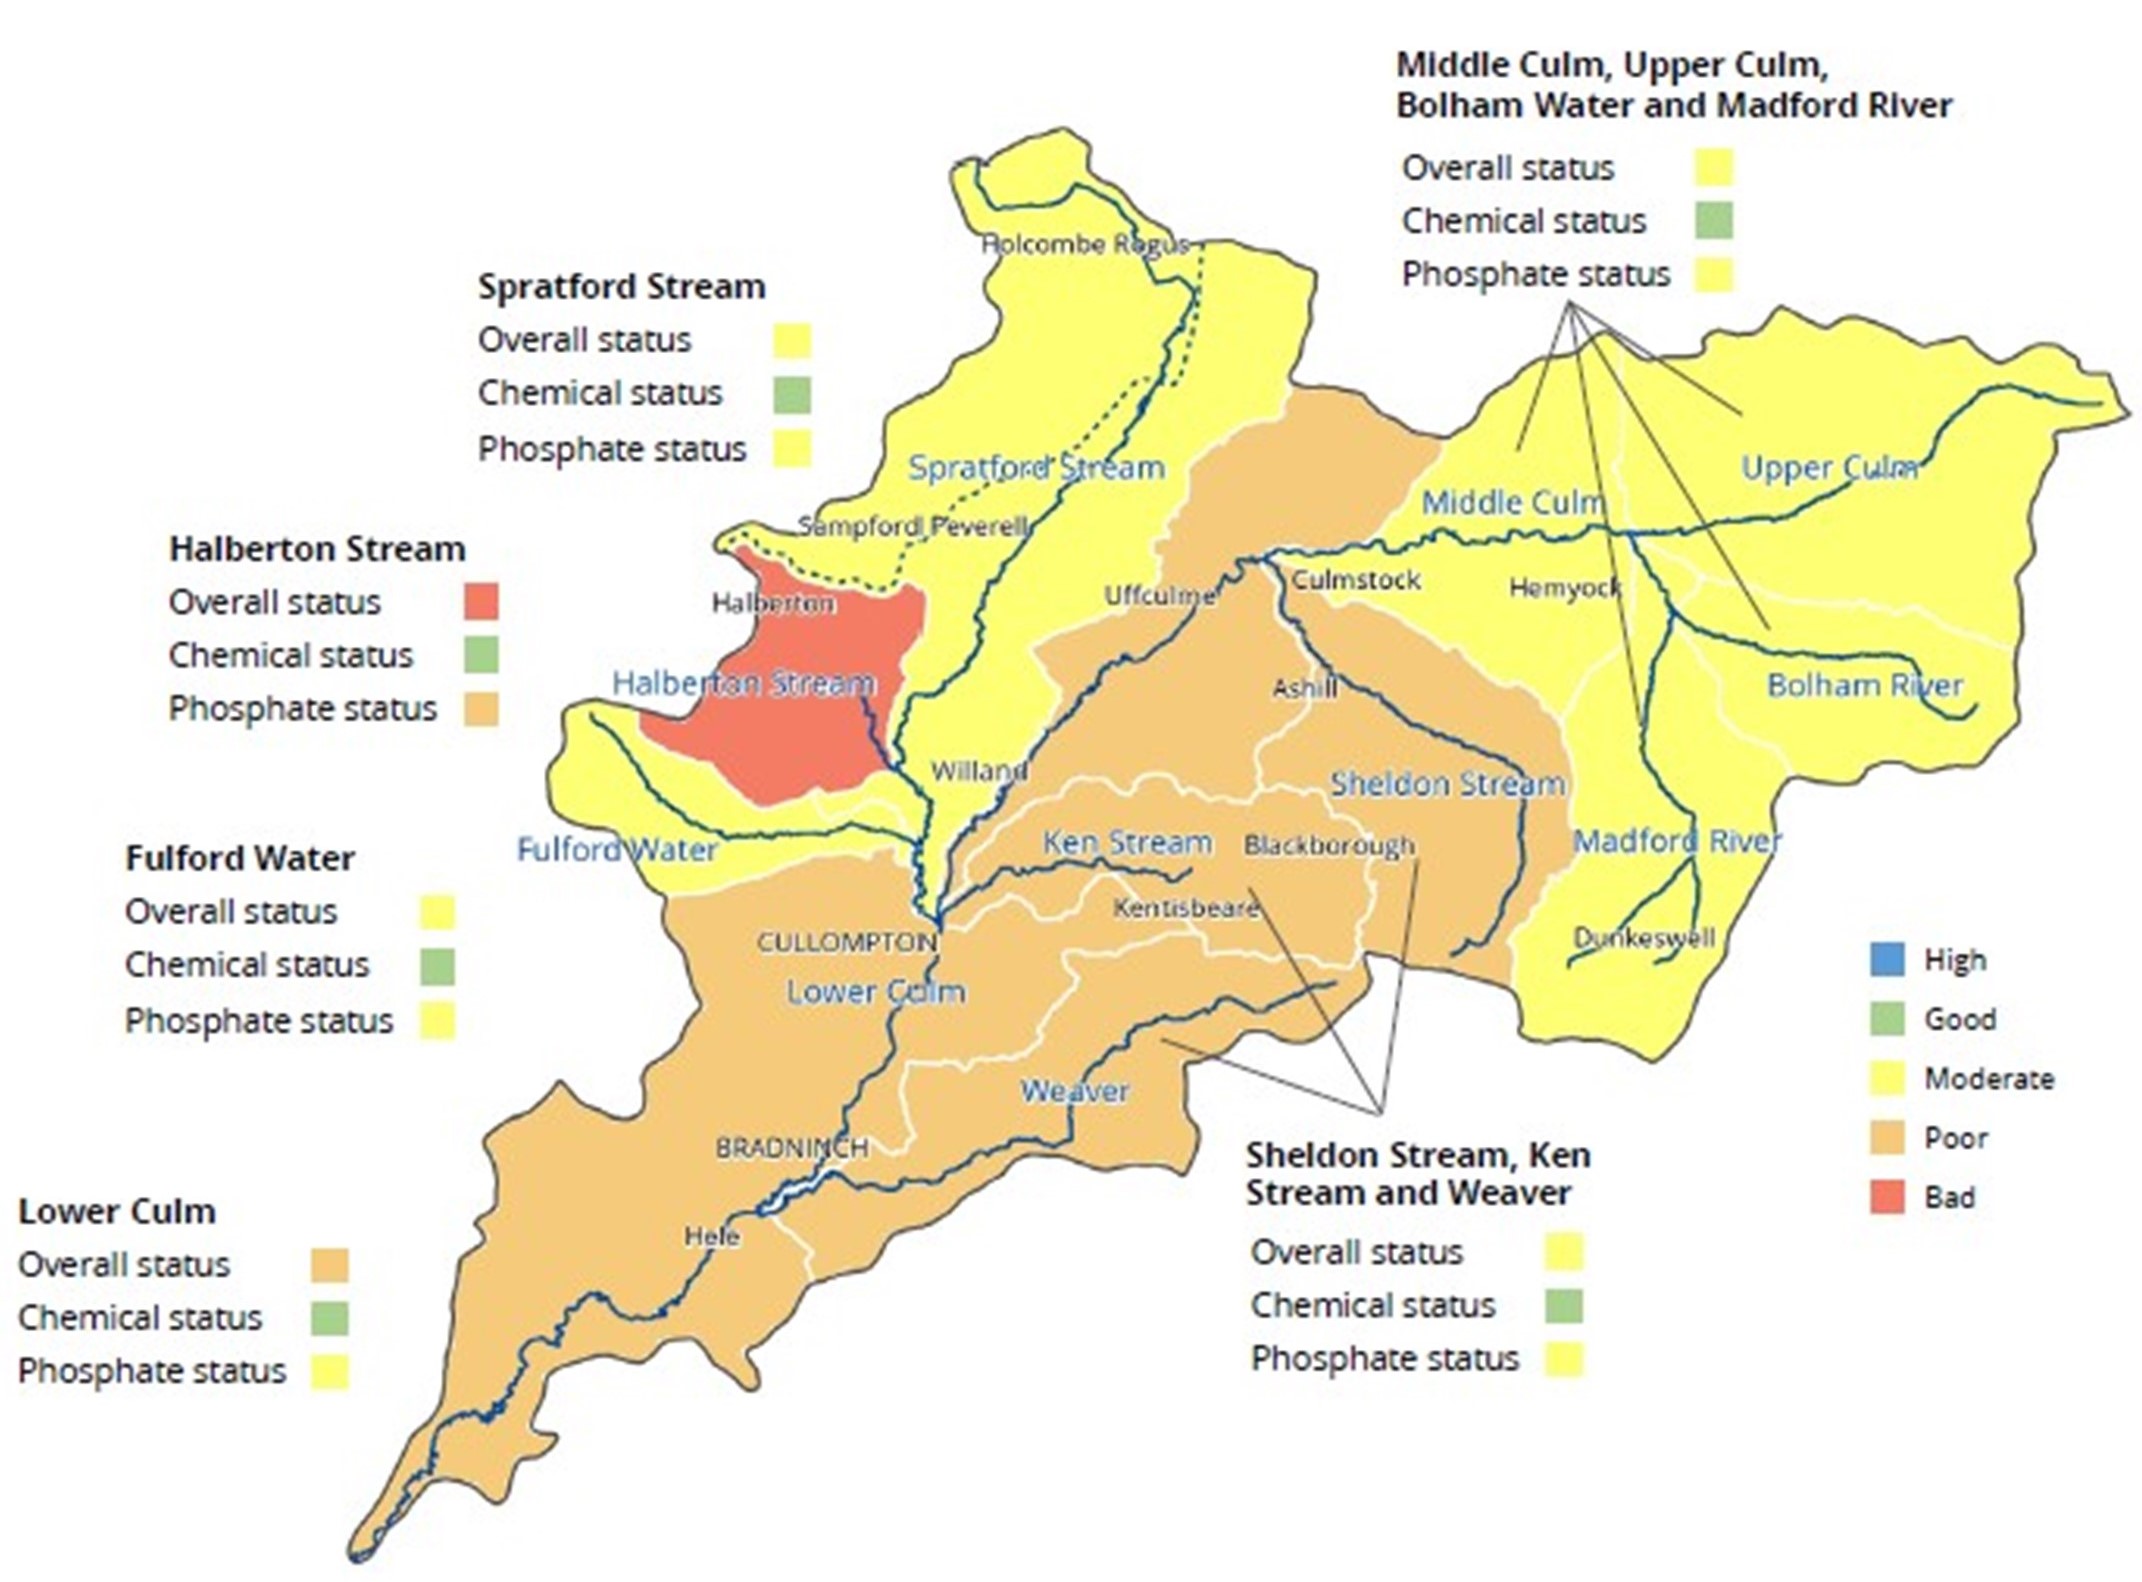 Map showing the River Culm Catchment with zones to show the overall water quality, chemical status and nutrient status of the water bodies.